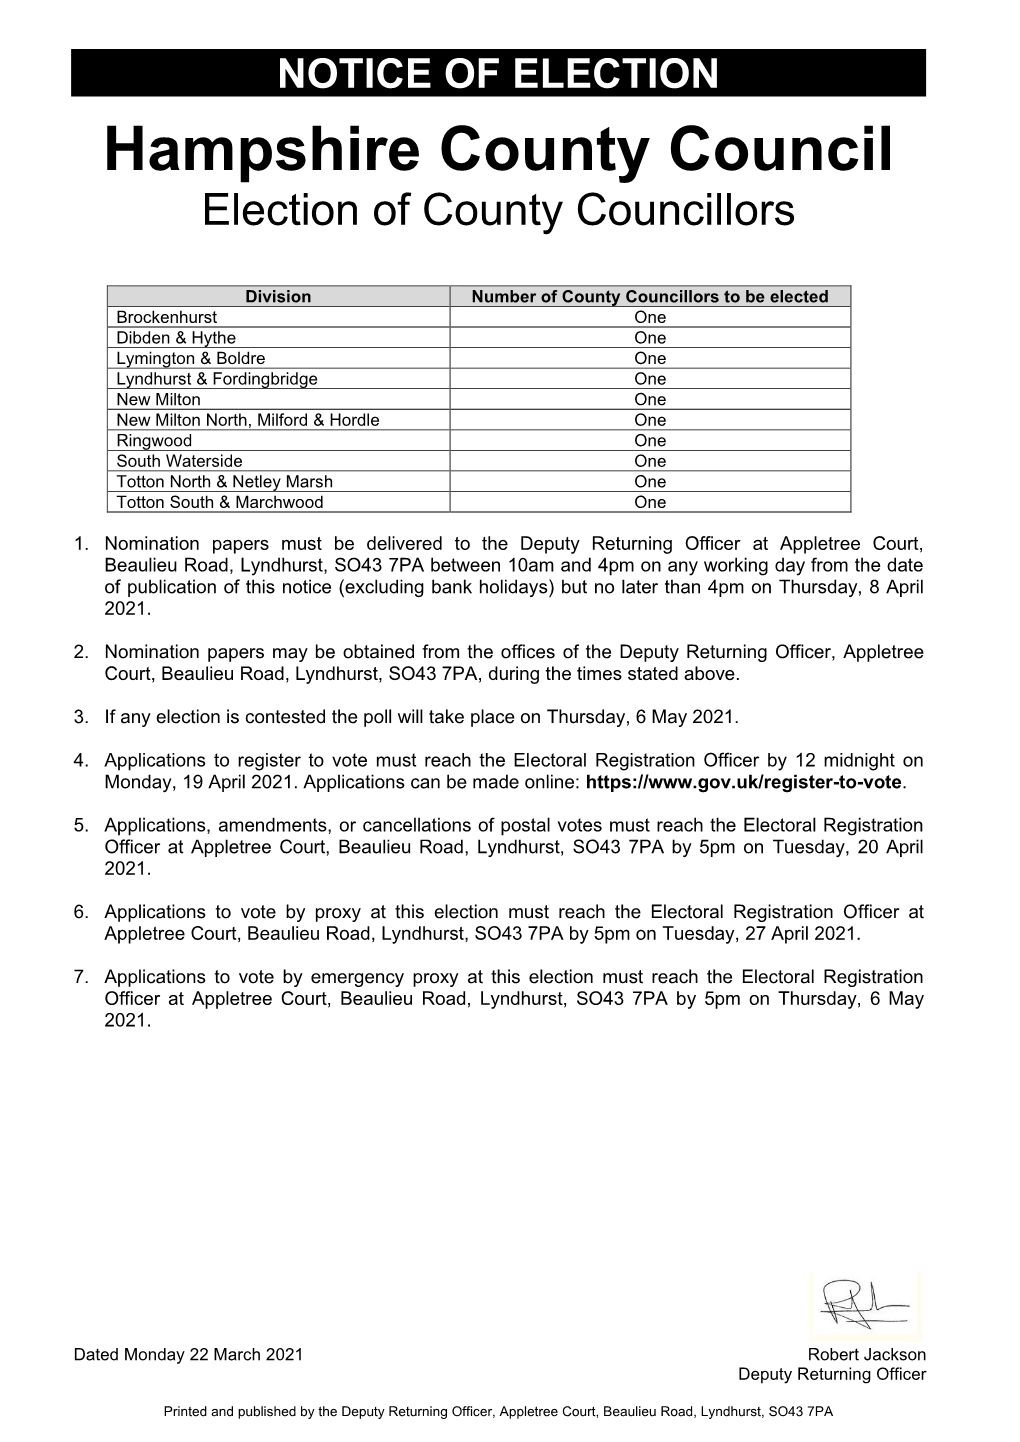 Hampshire County Council Election of County Councillors